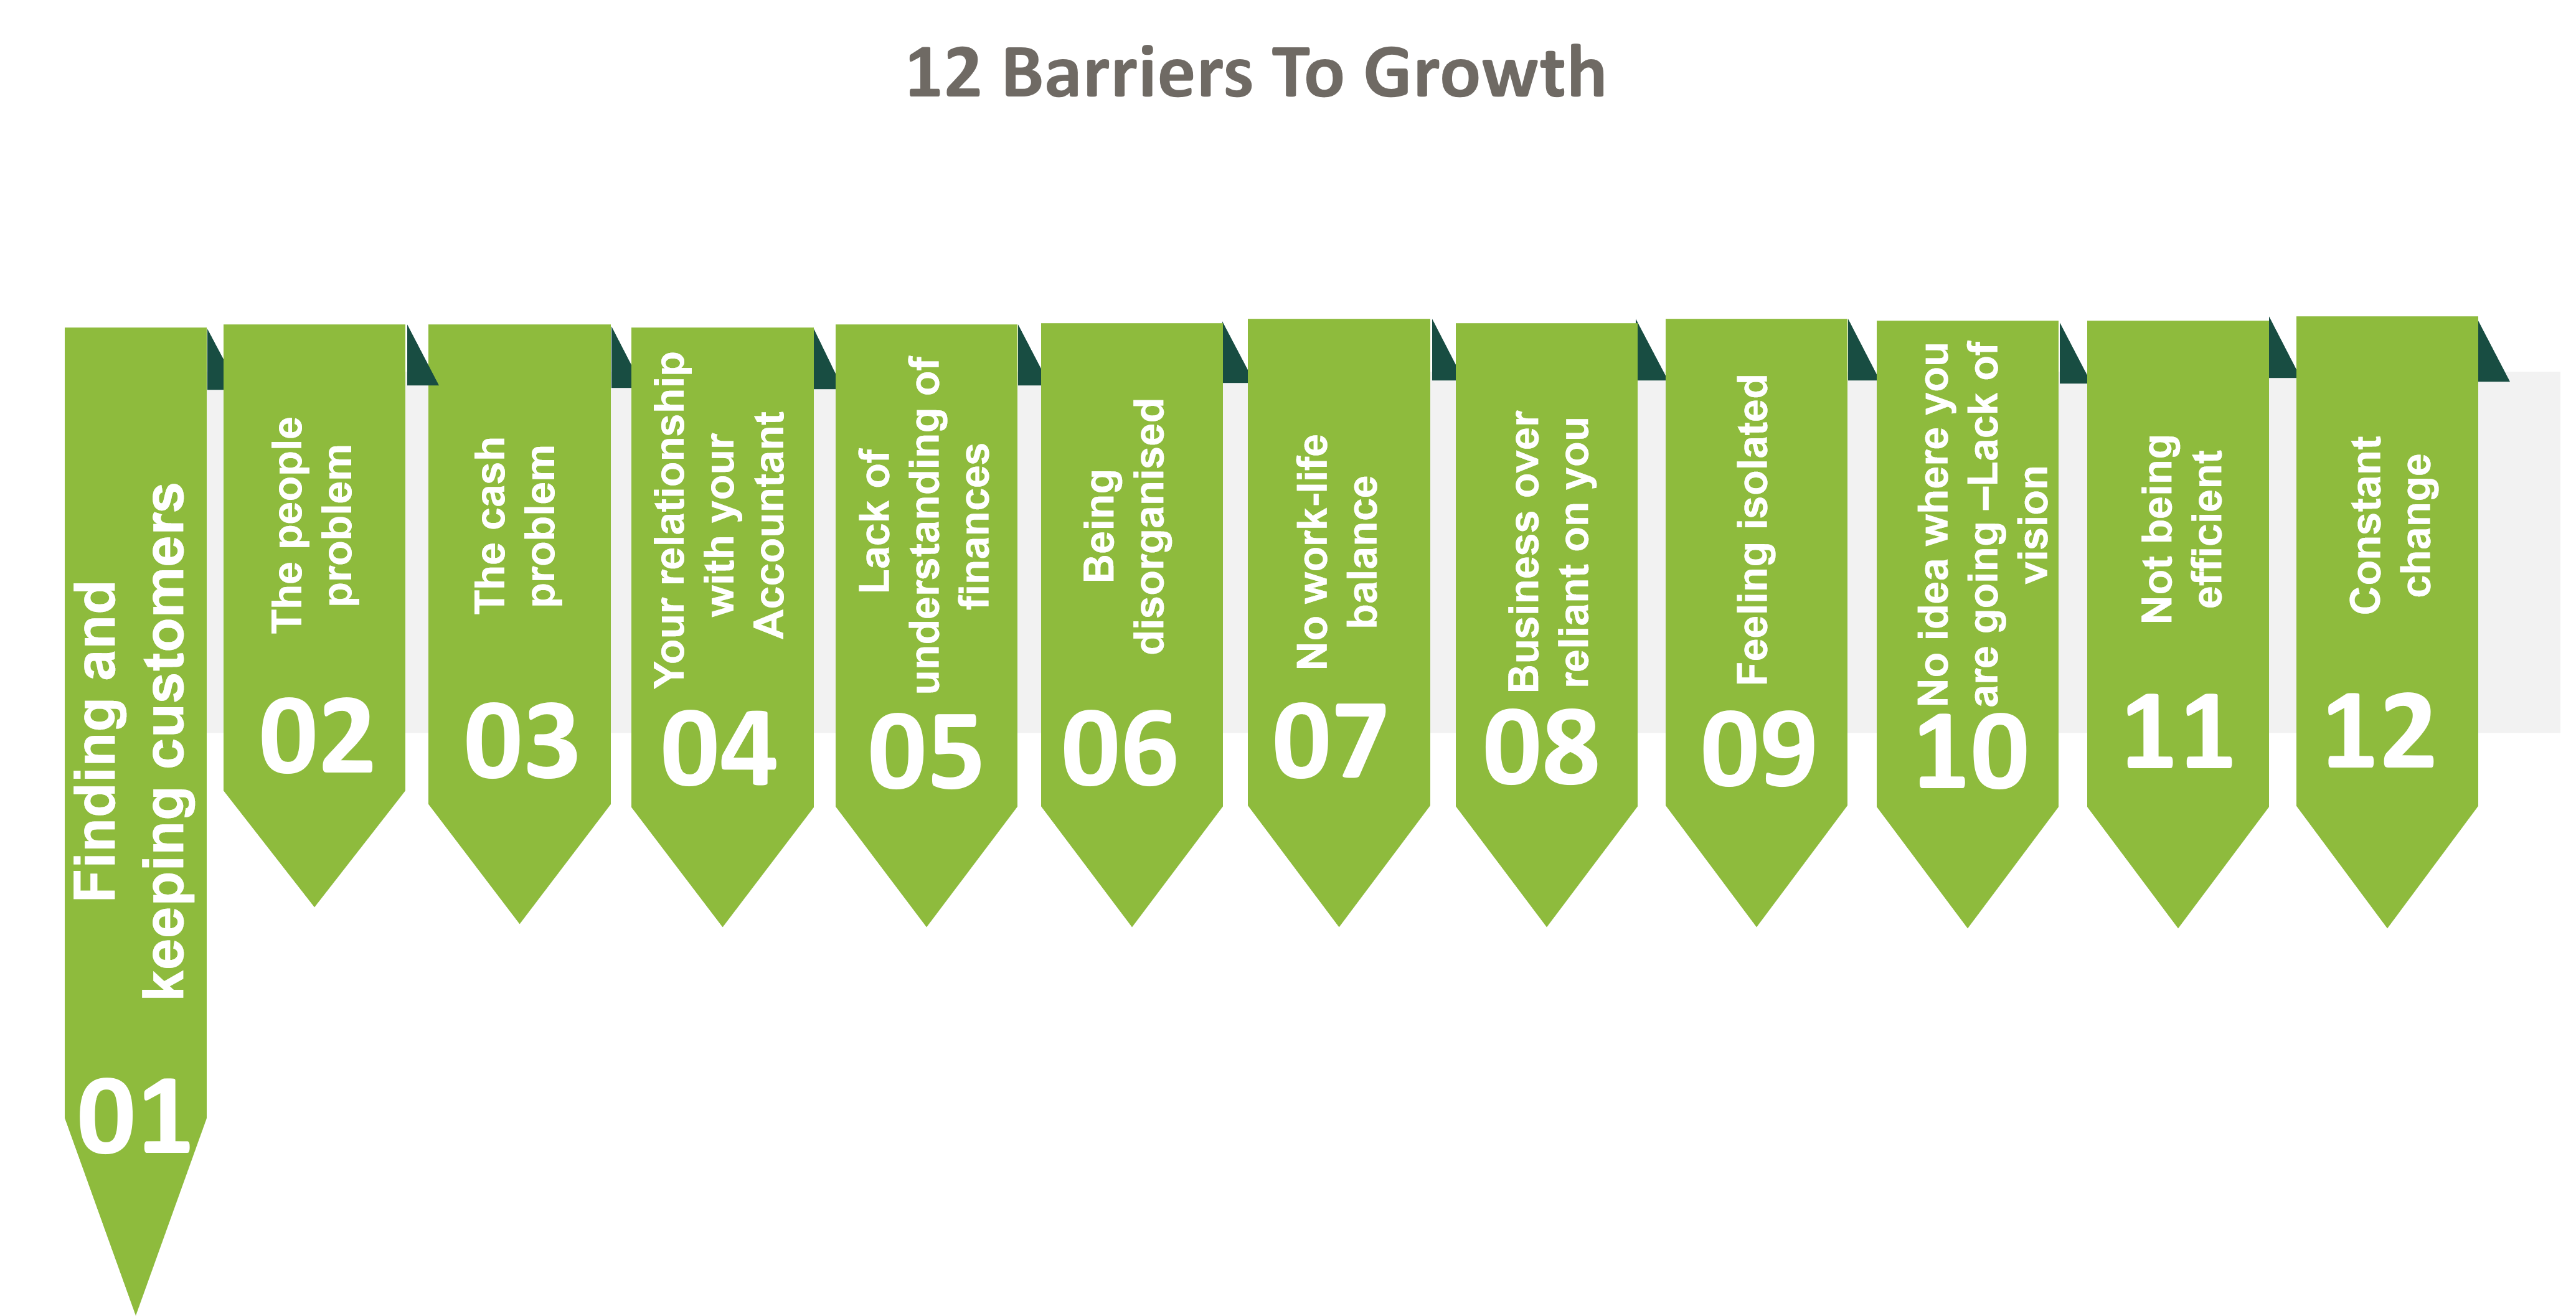 12 barriers to growth infographic